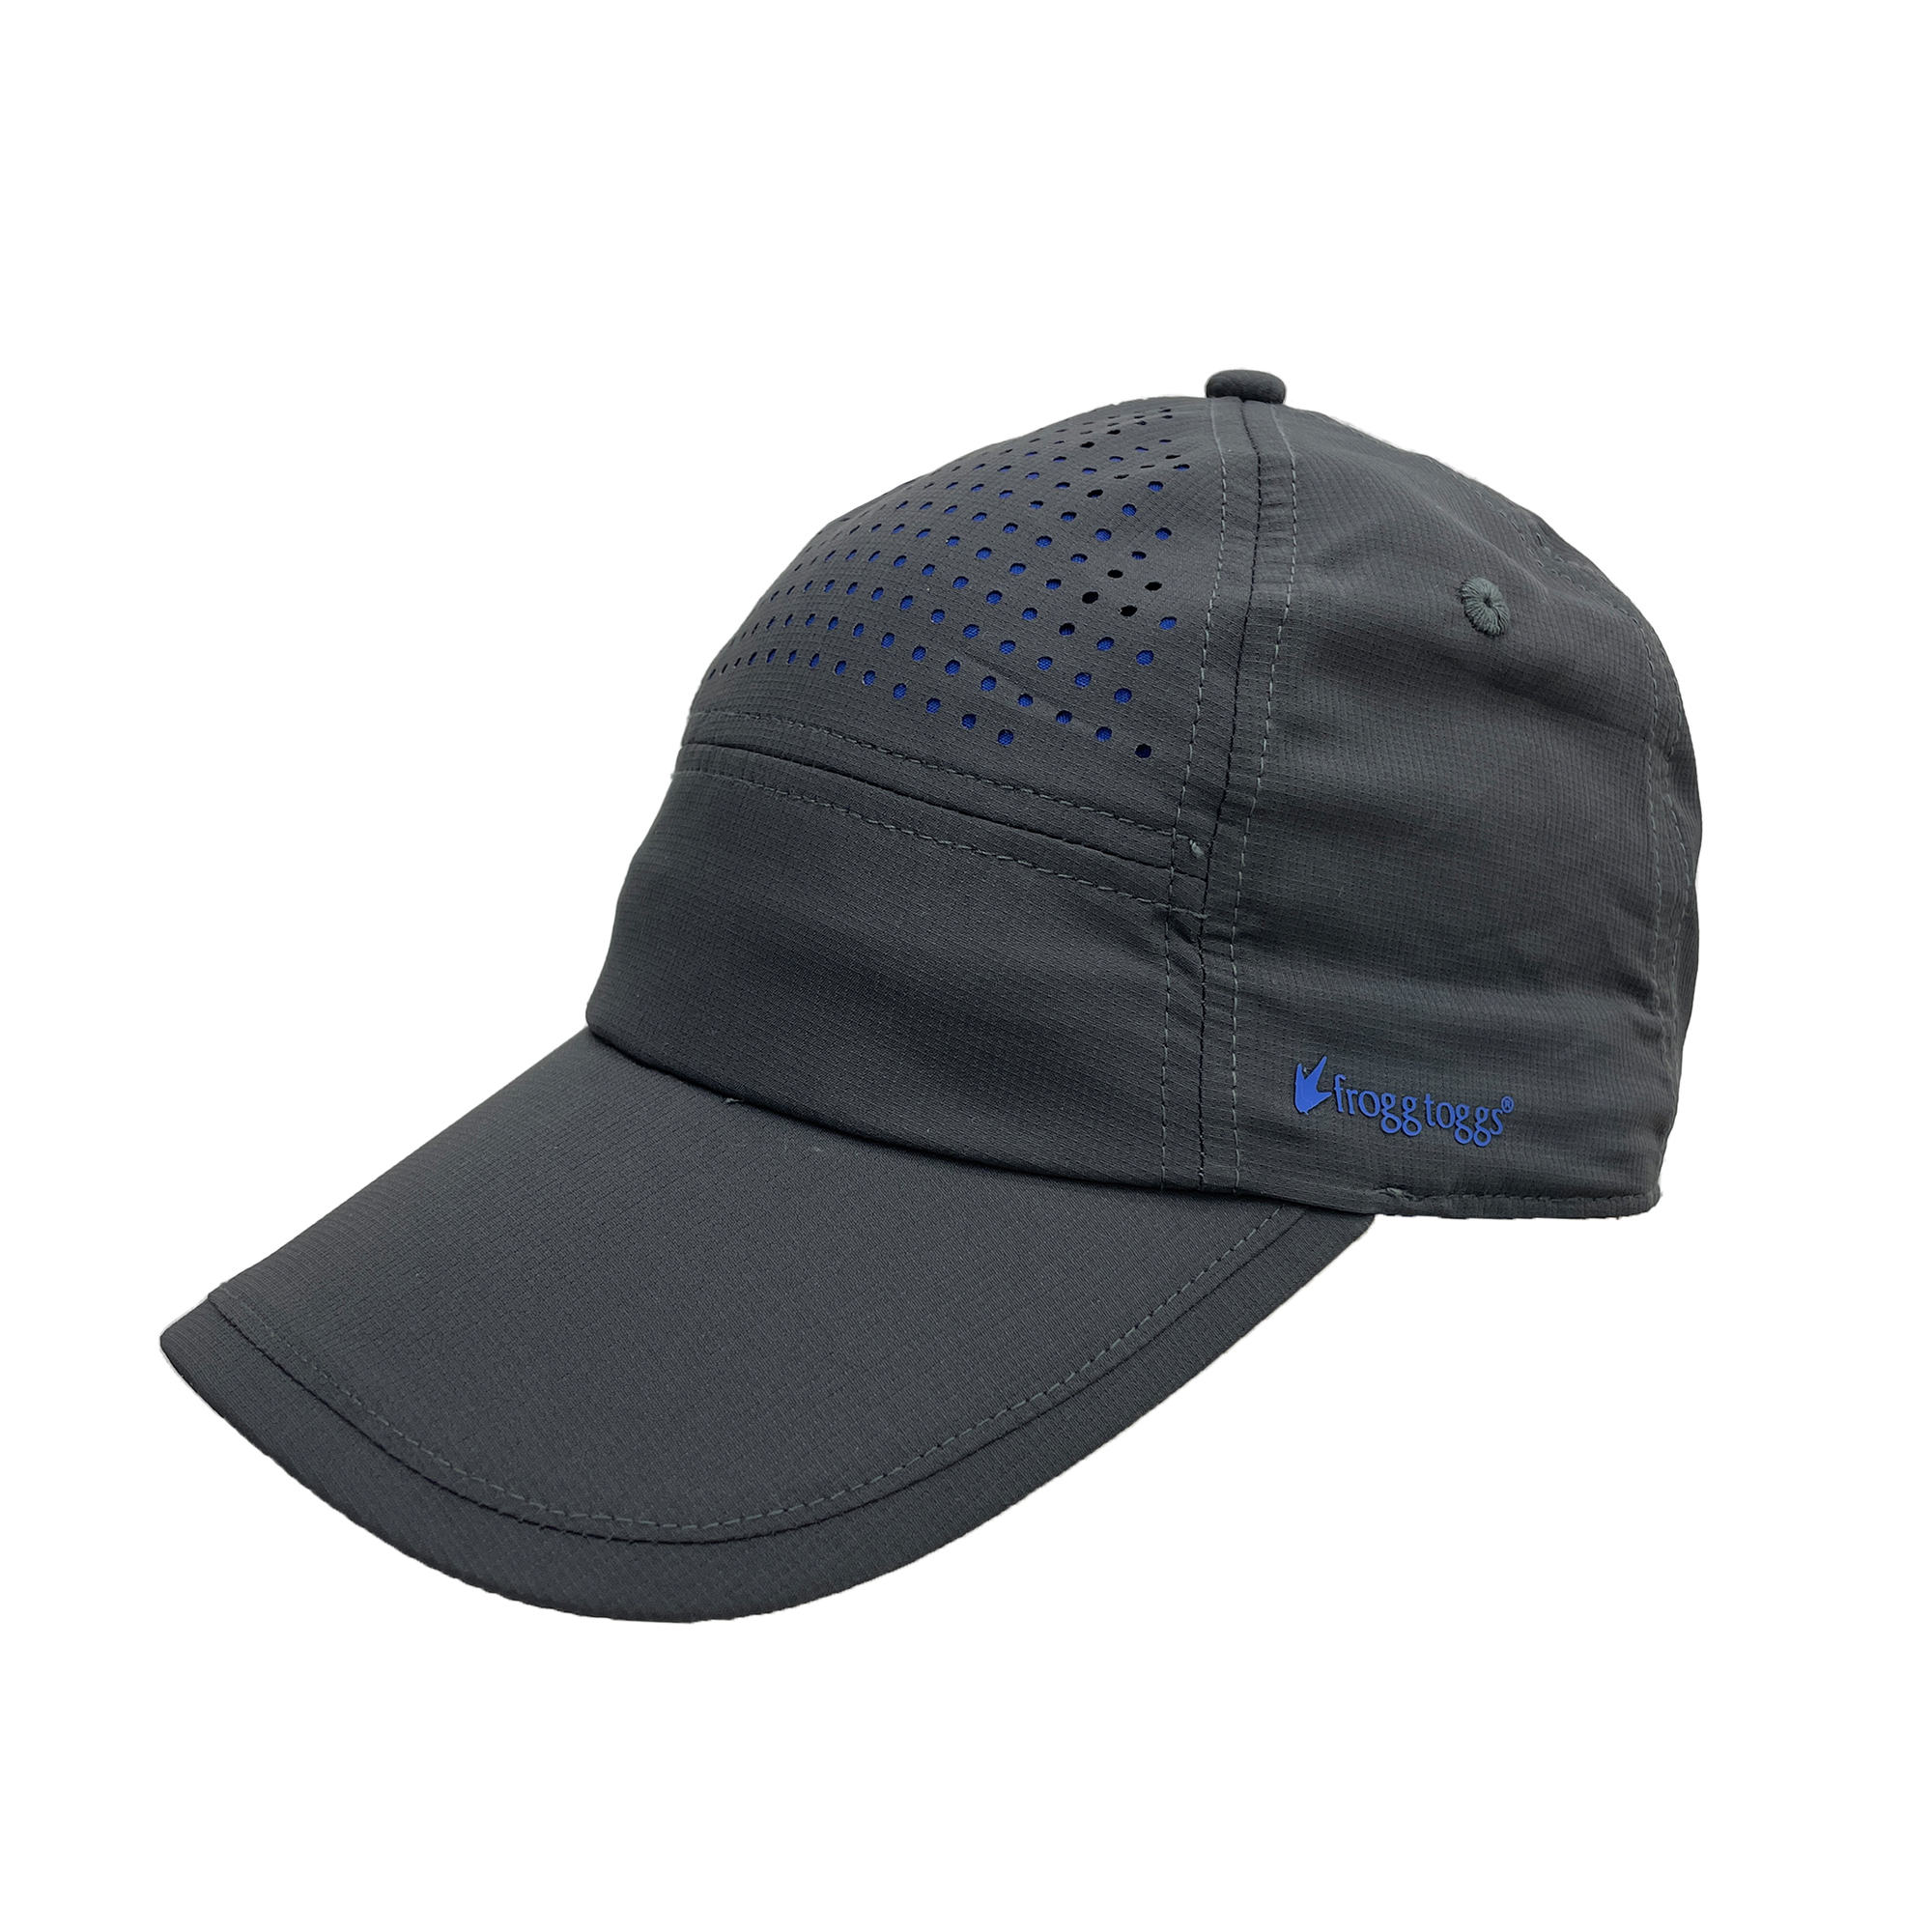 frogg toggs Chilly Pro Performance Cooling Cap | Northern Tool